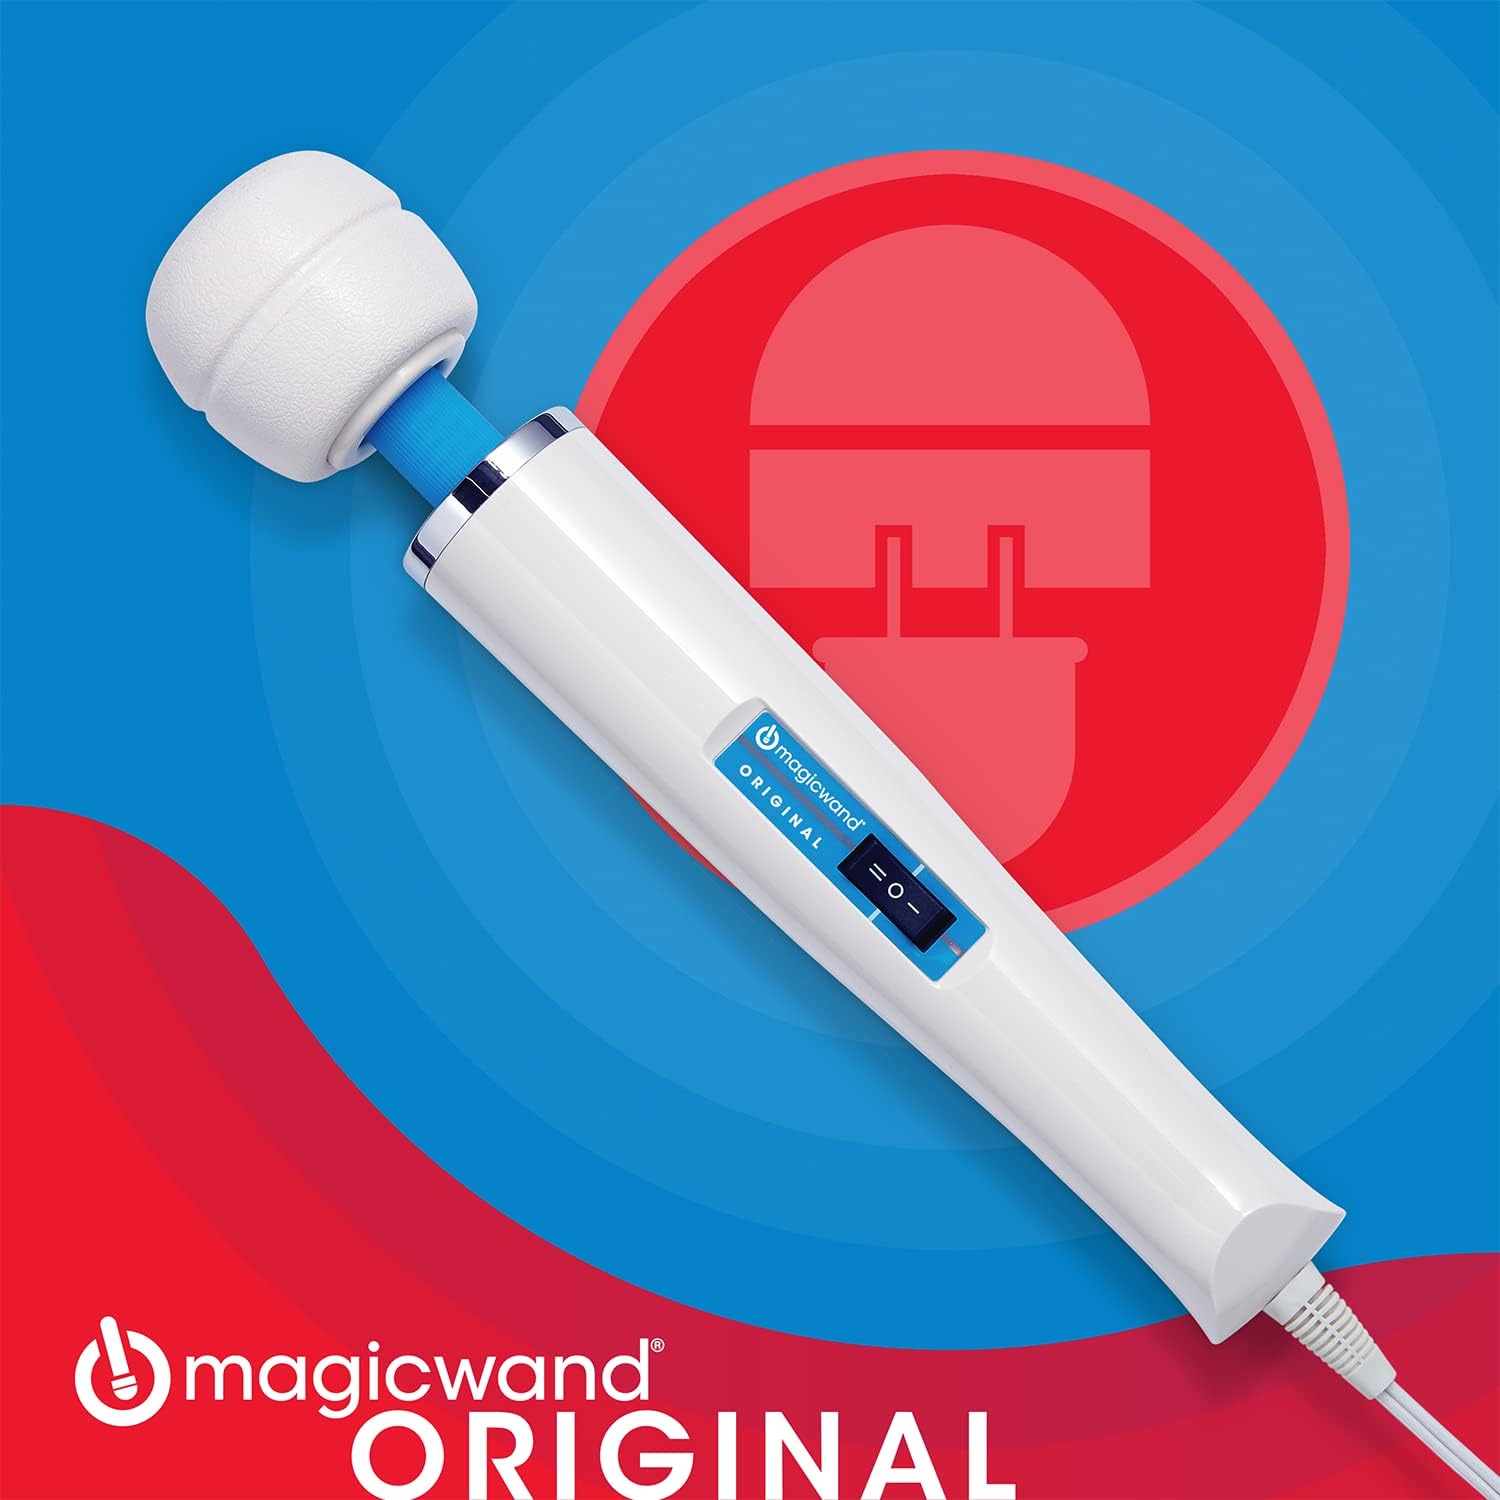 Authentic Magic Wand Massager Original HV-260 \u2013 Plug-in 2-Speed with Flexible Neck & Ultra-Powerful Motor for Deep, Rumbling, Muscle Relaxing Vibrations. 6-Foot Cord, 1-Year Warranty